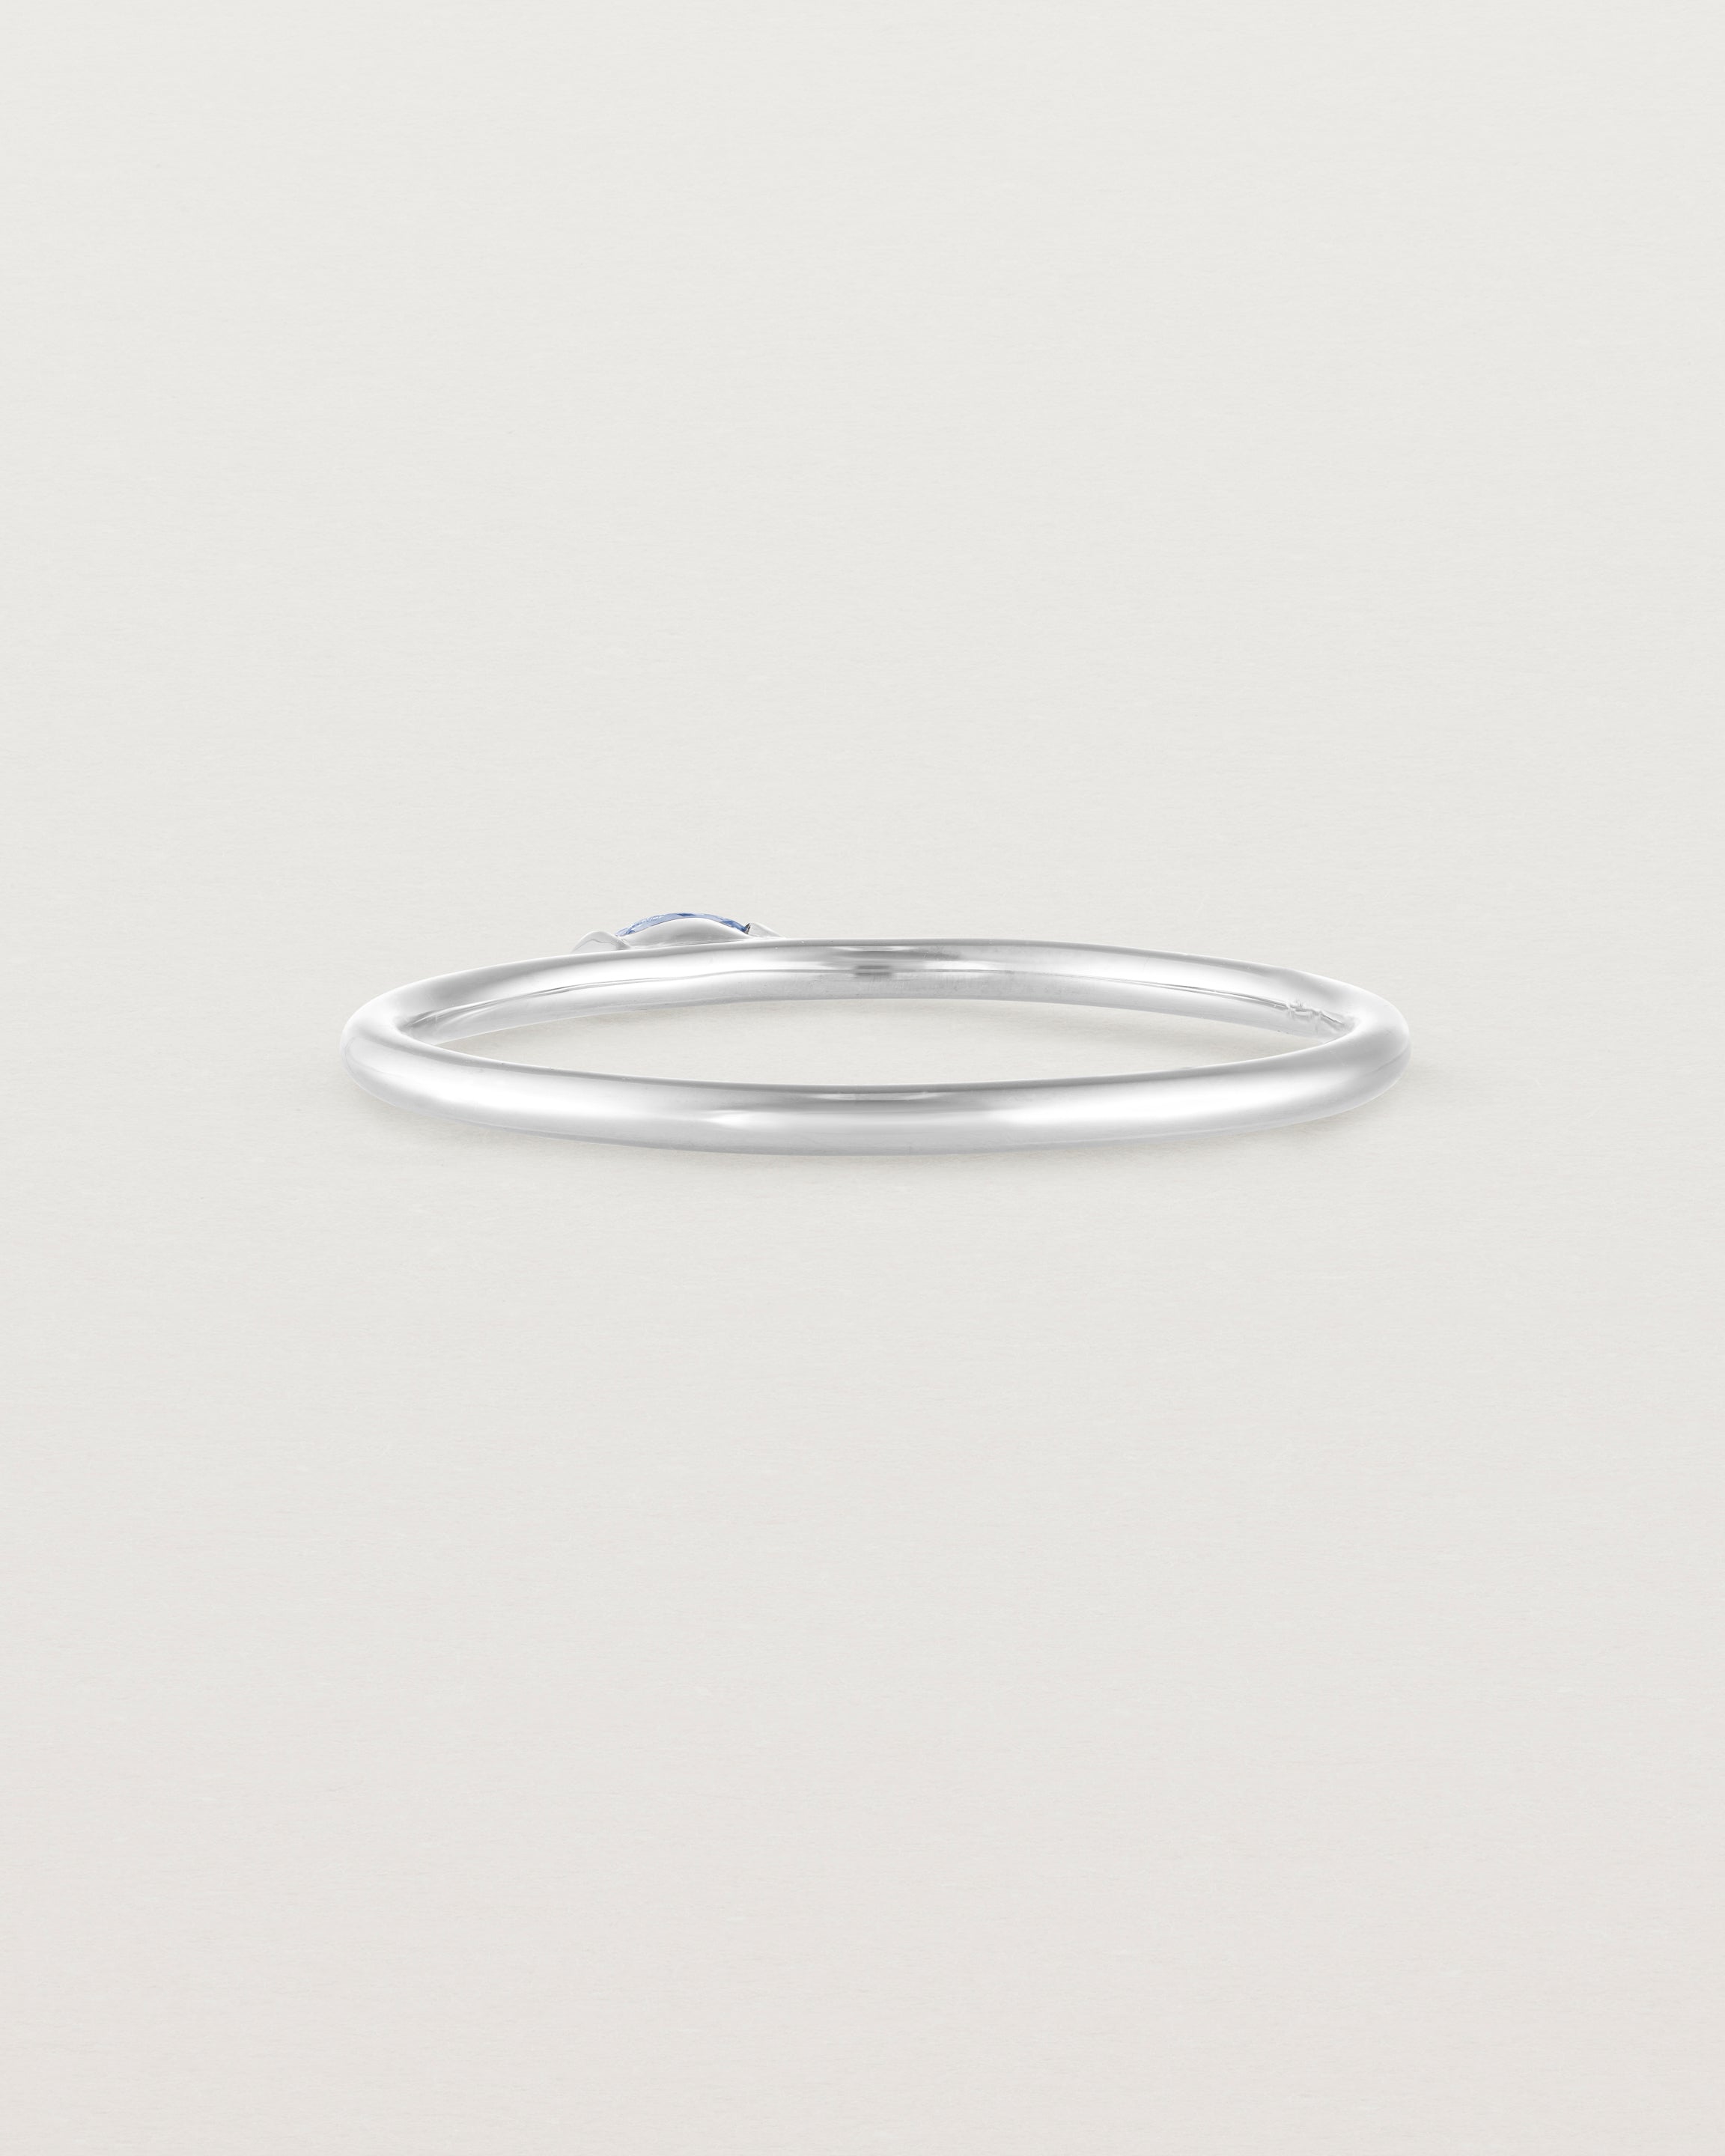 Back view of the Vega Stacking Ring | Sapphire in white gold.